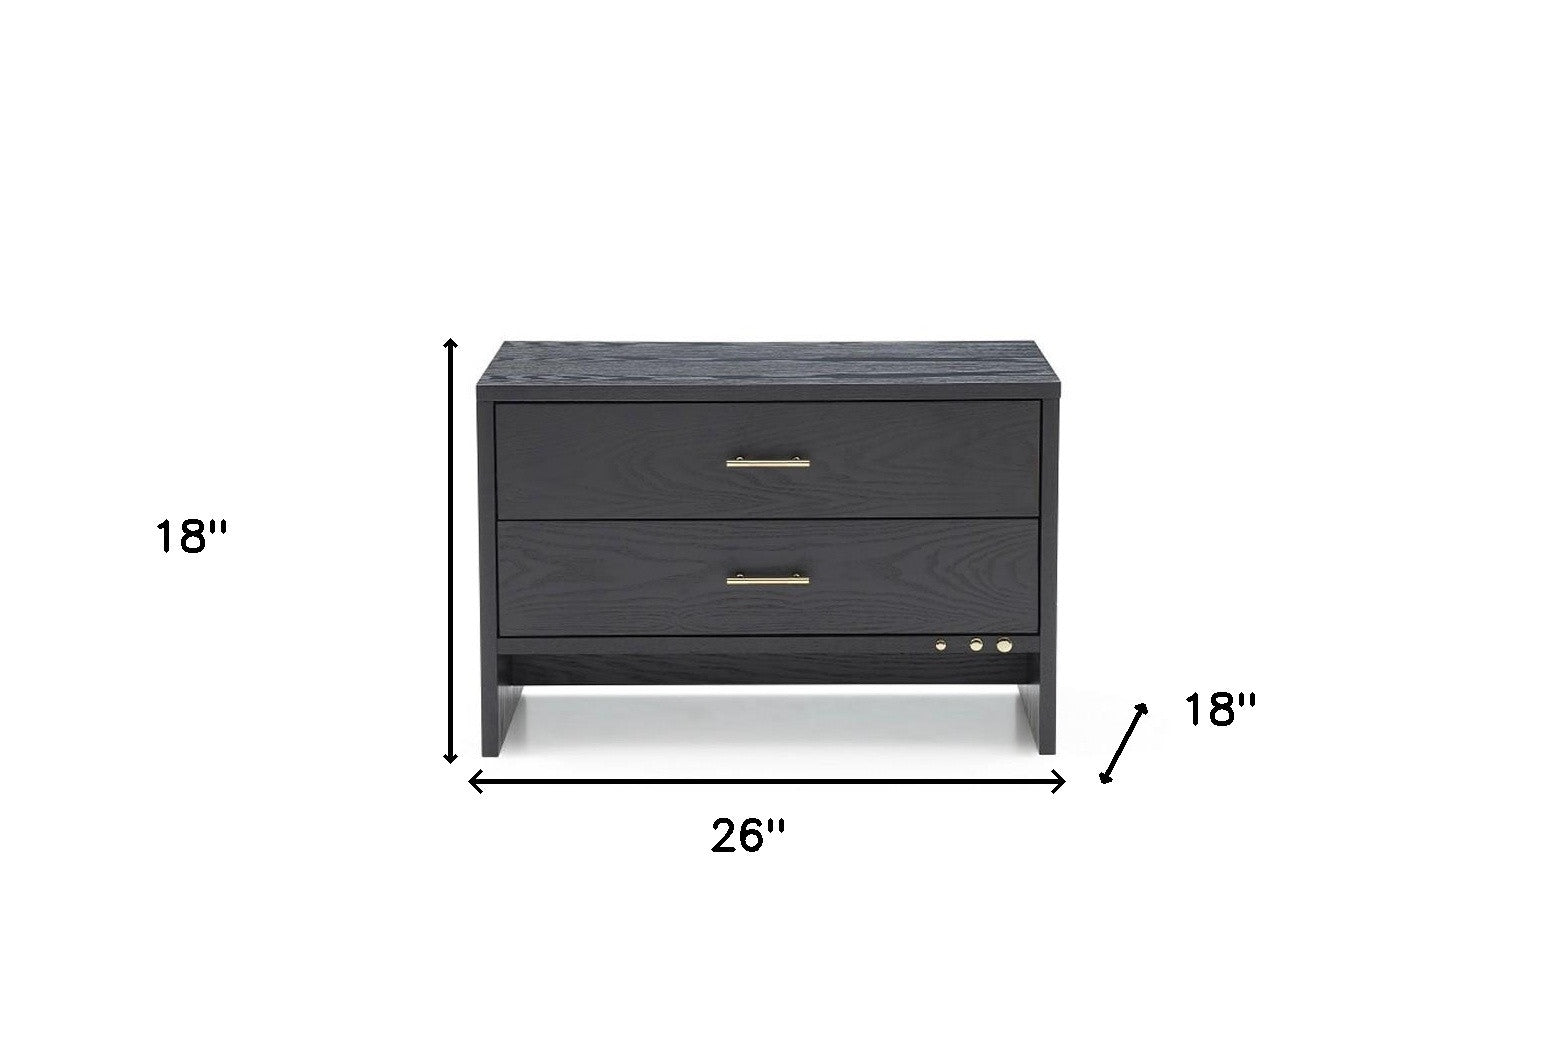 Modern Dark Gray Ash Nightstand with Two Drawers